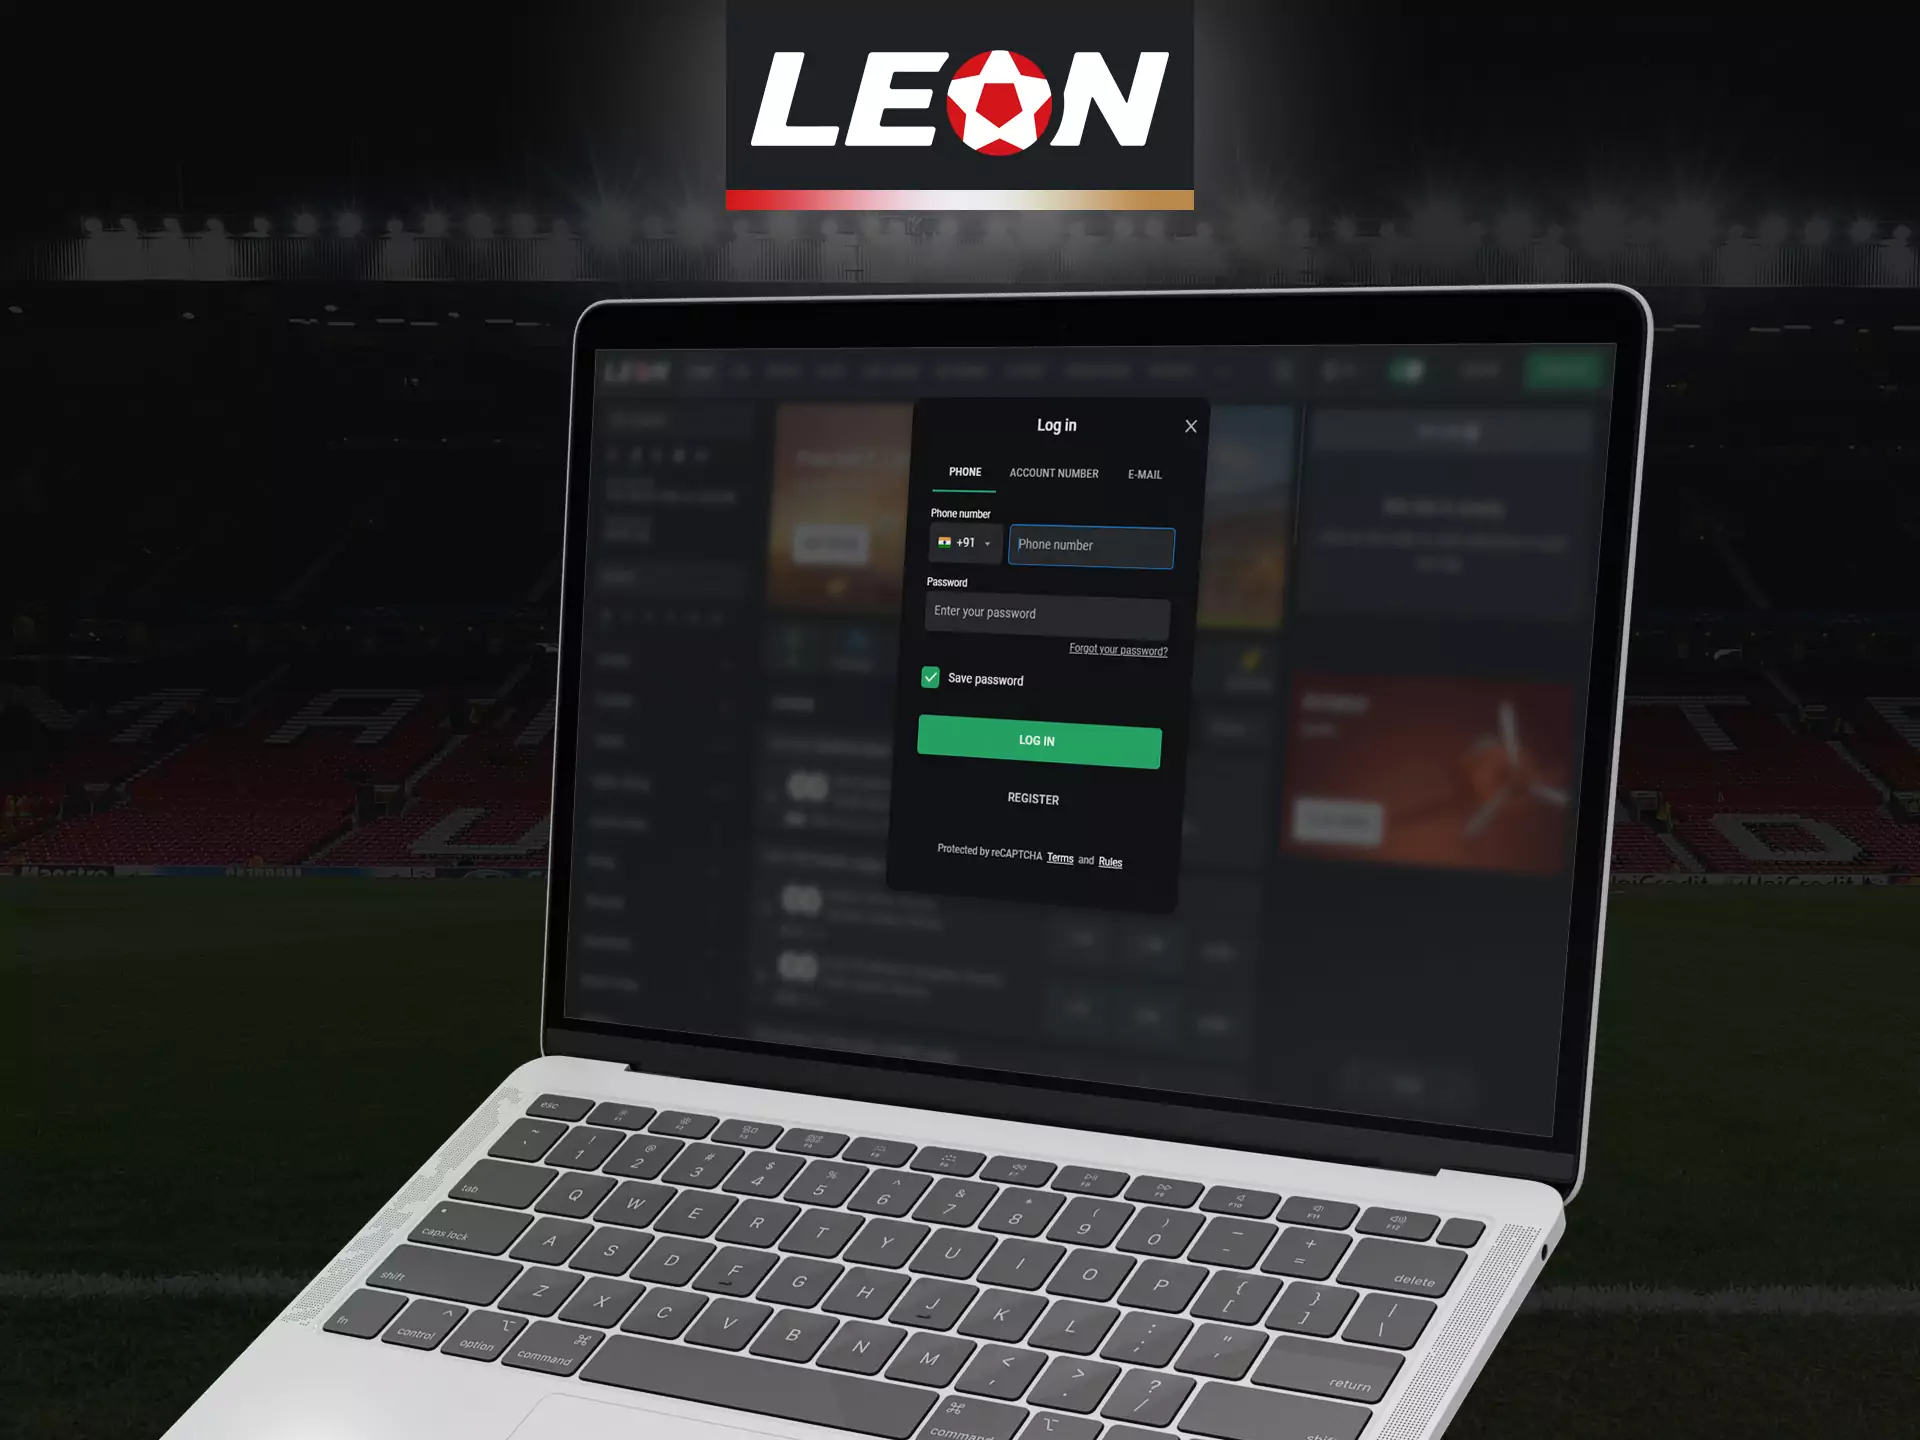 Login to your Leonbet account to get access to all features and bonuses.